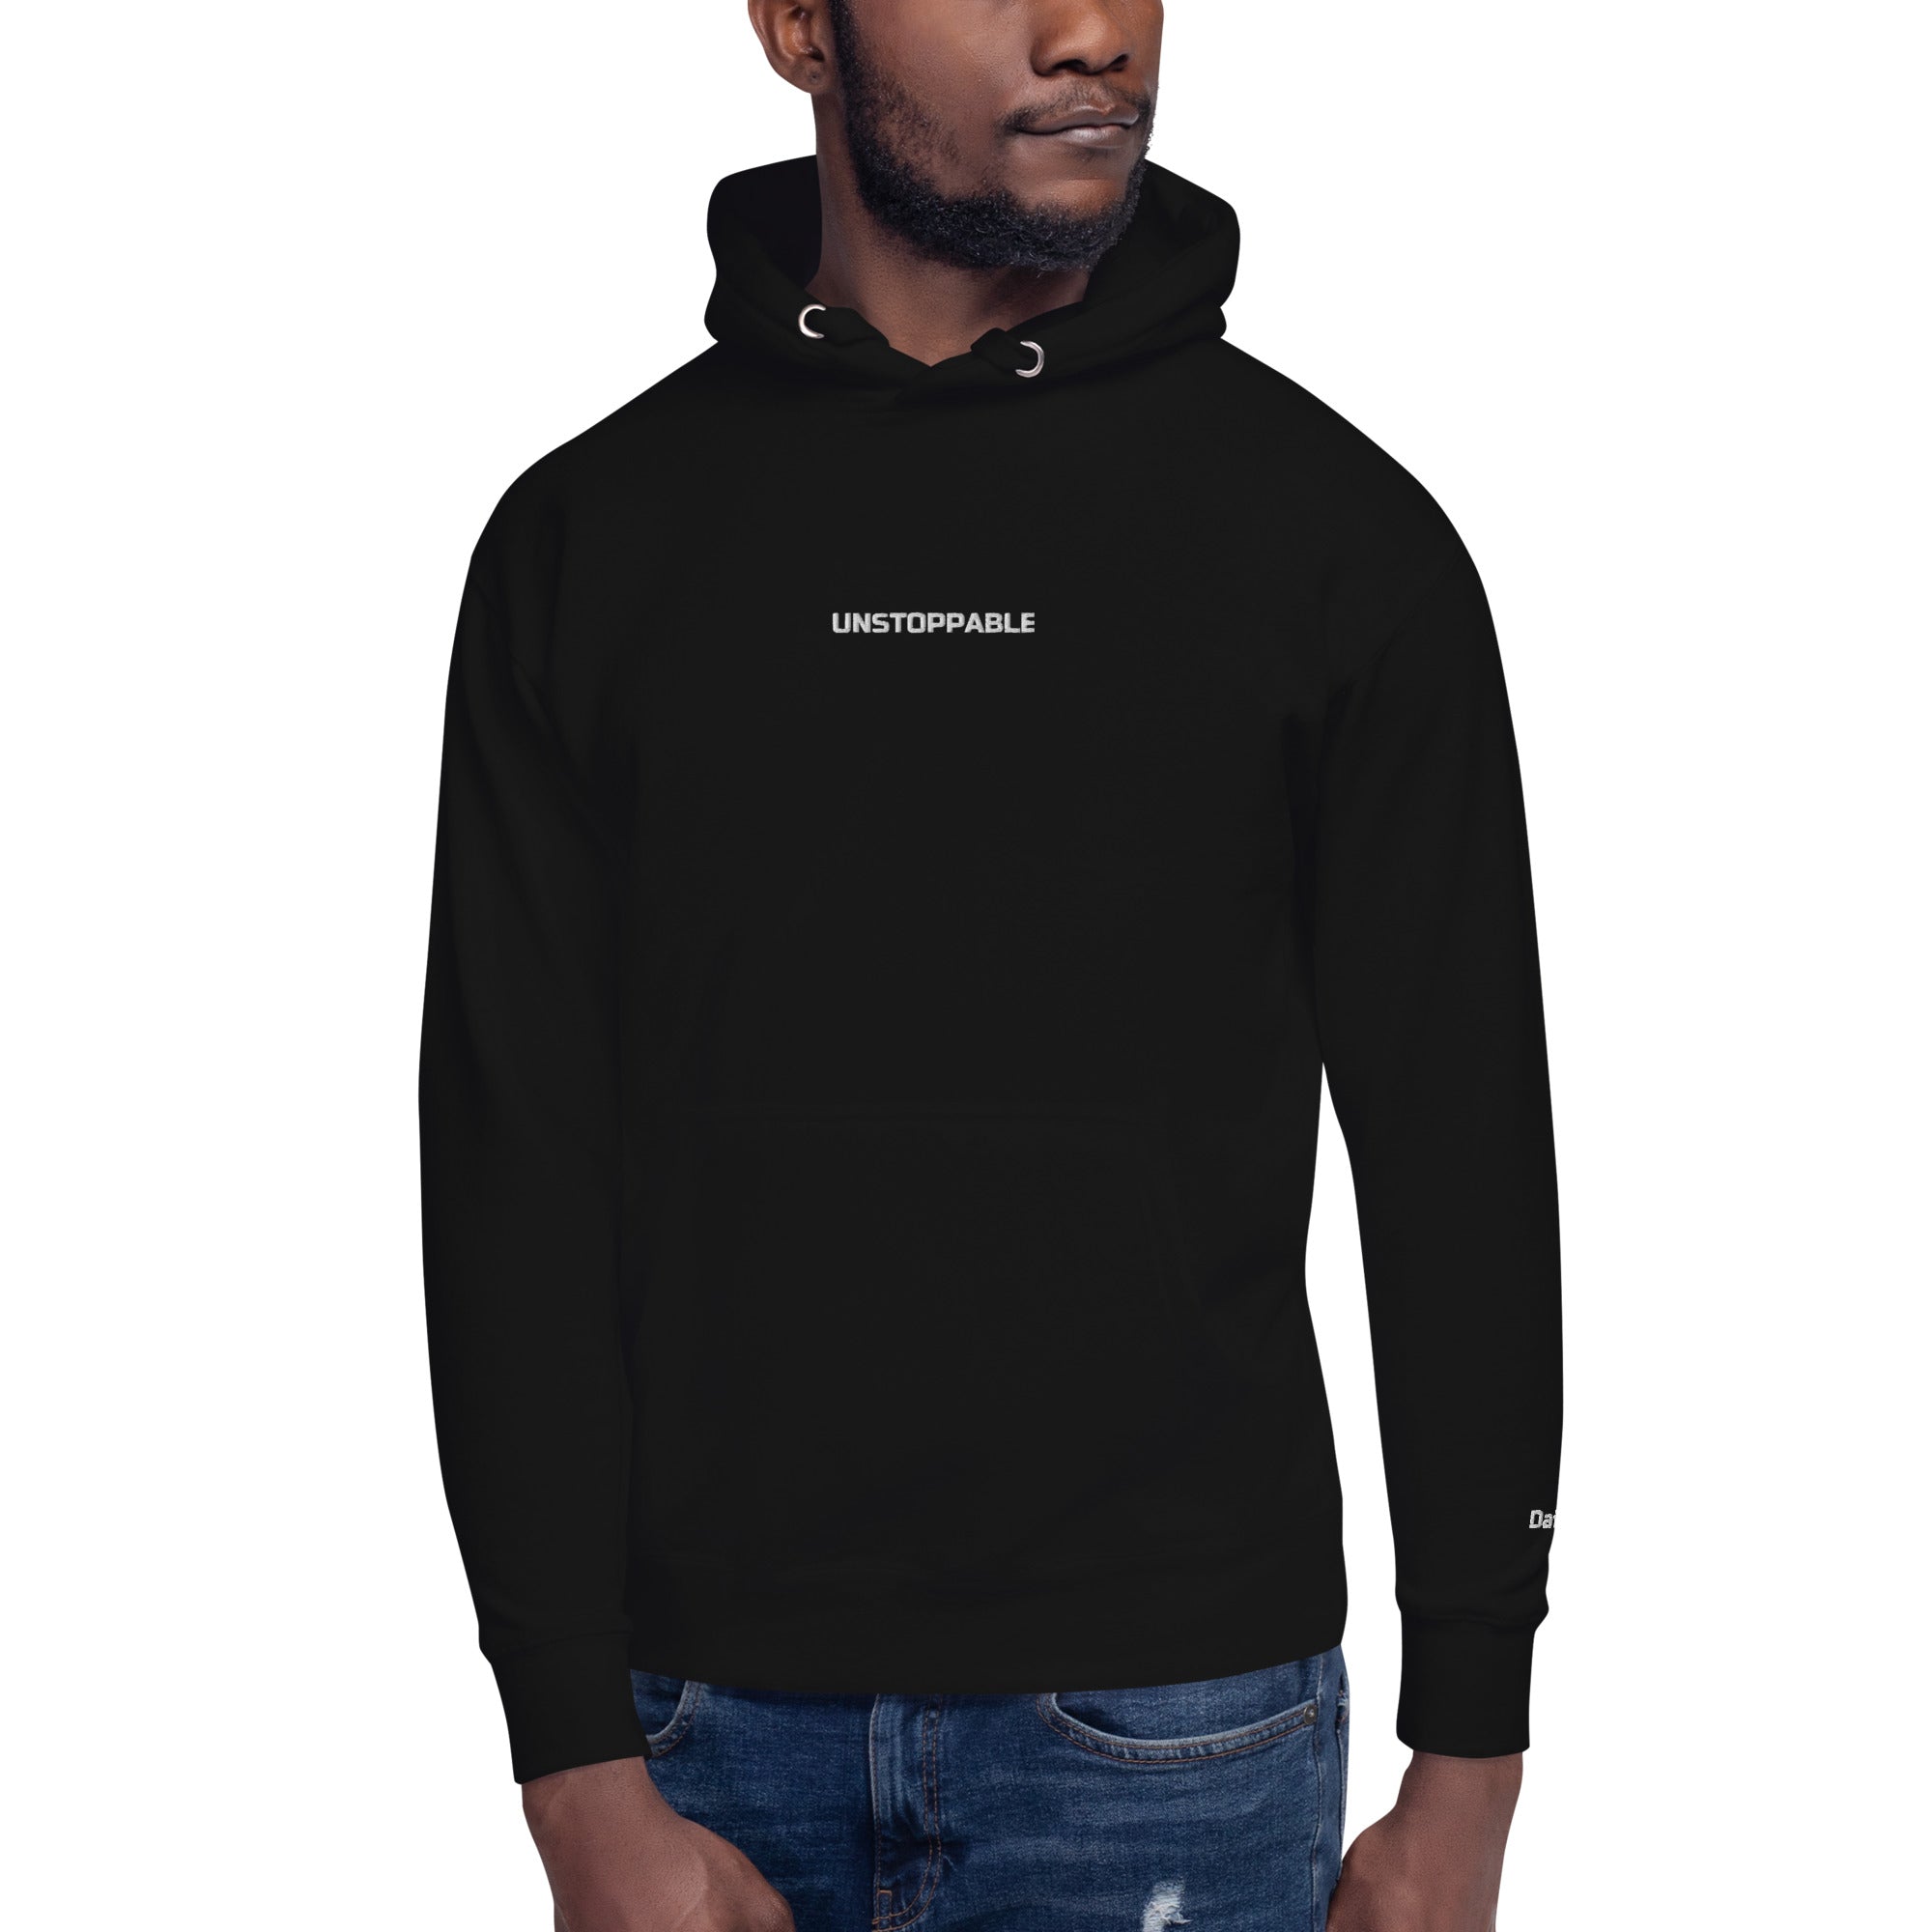 "Unstoppable" Premium Embroidered Hoodie